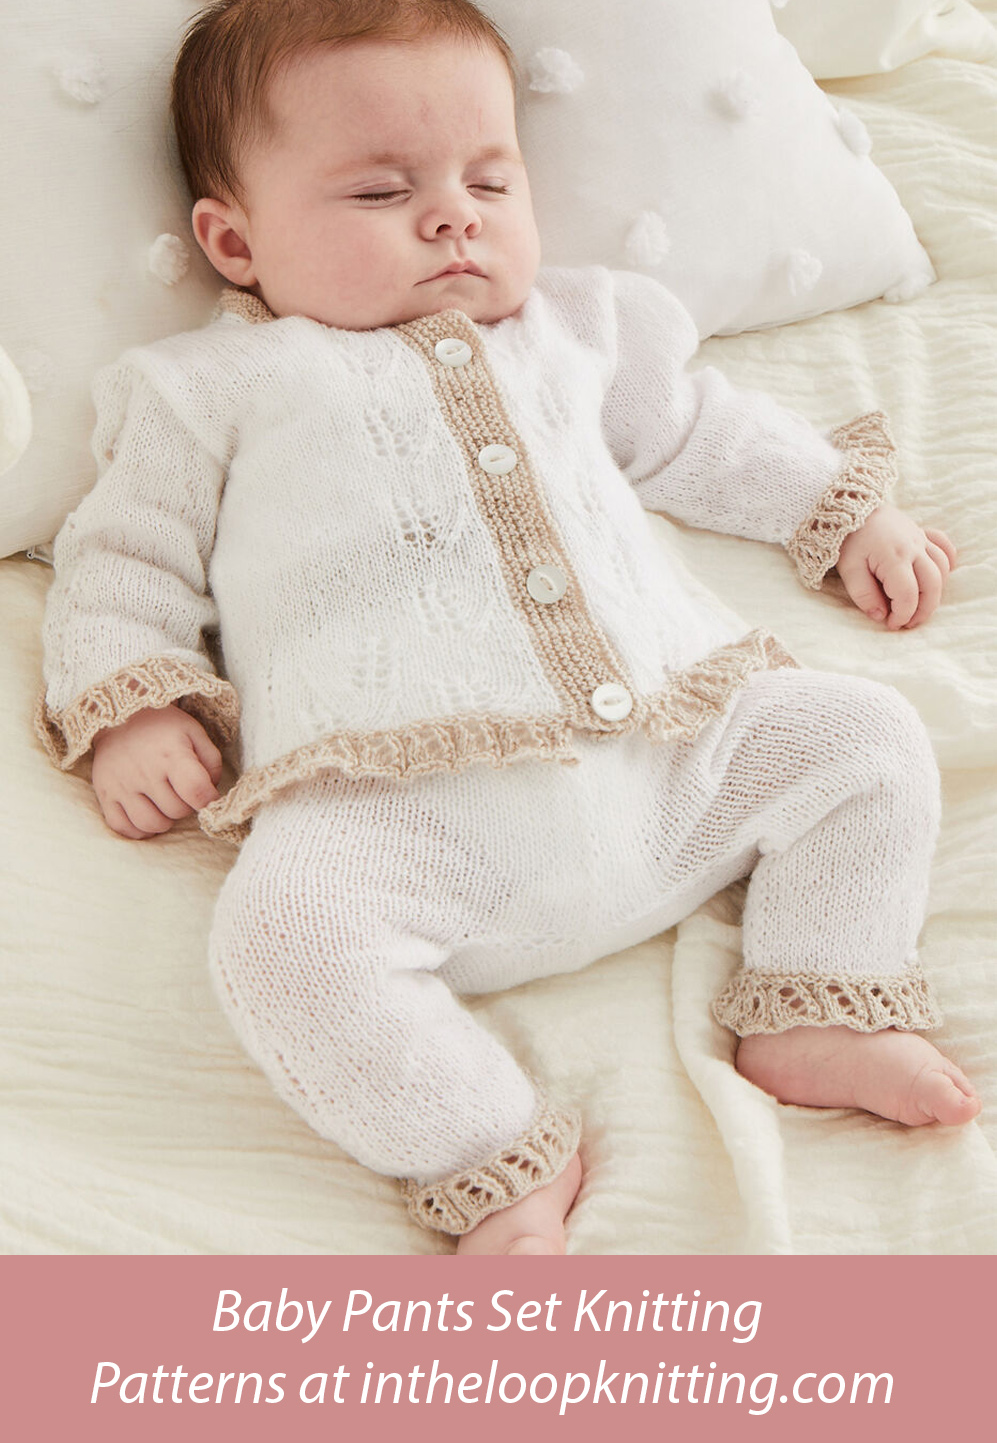 Baby Little Lacy Trouser Suit Set Knitting Pattern